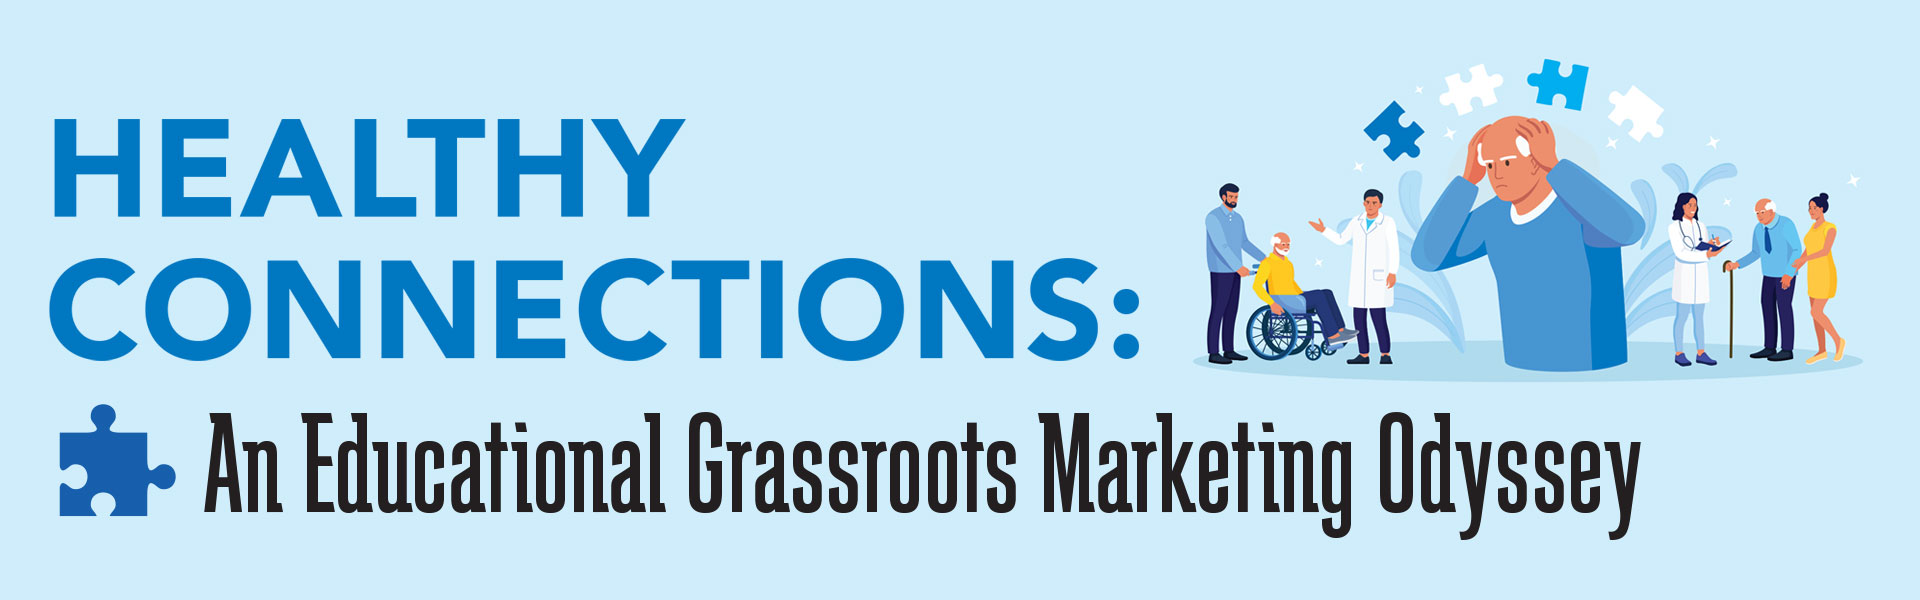 Healthy Connections: An Educational Grassroots Marketing Odyssey